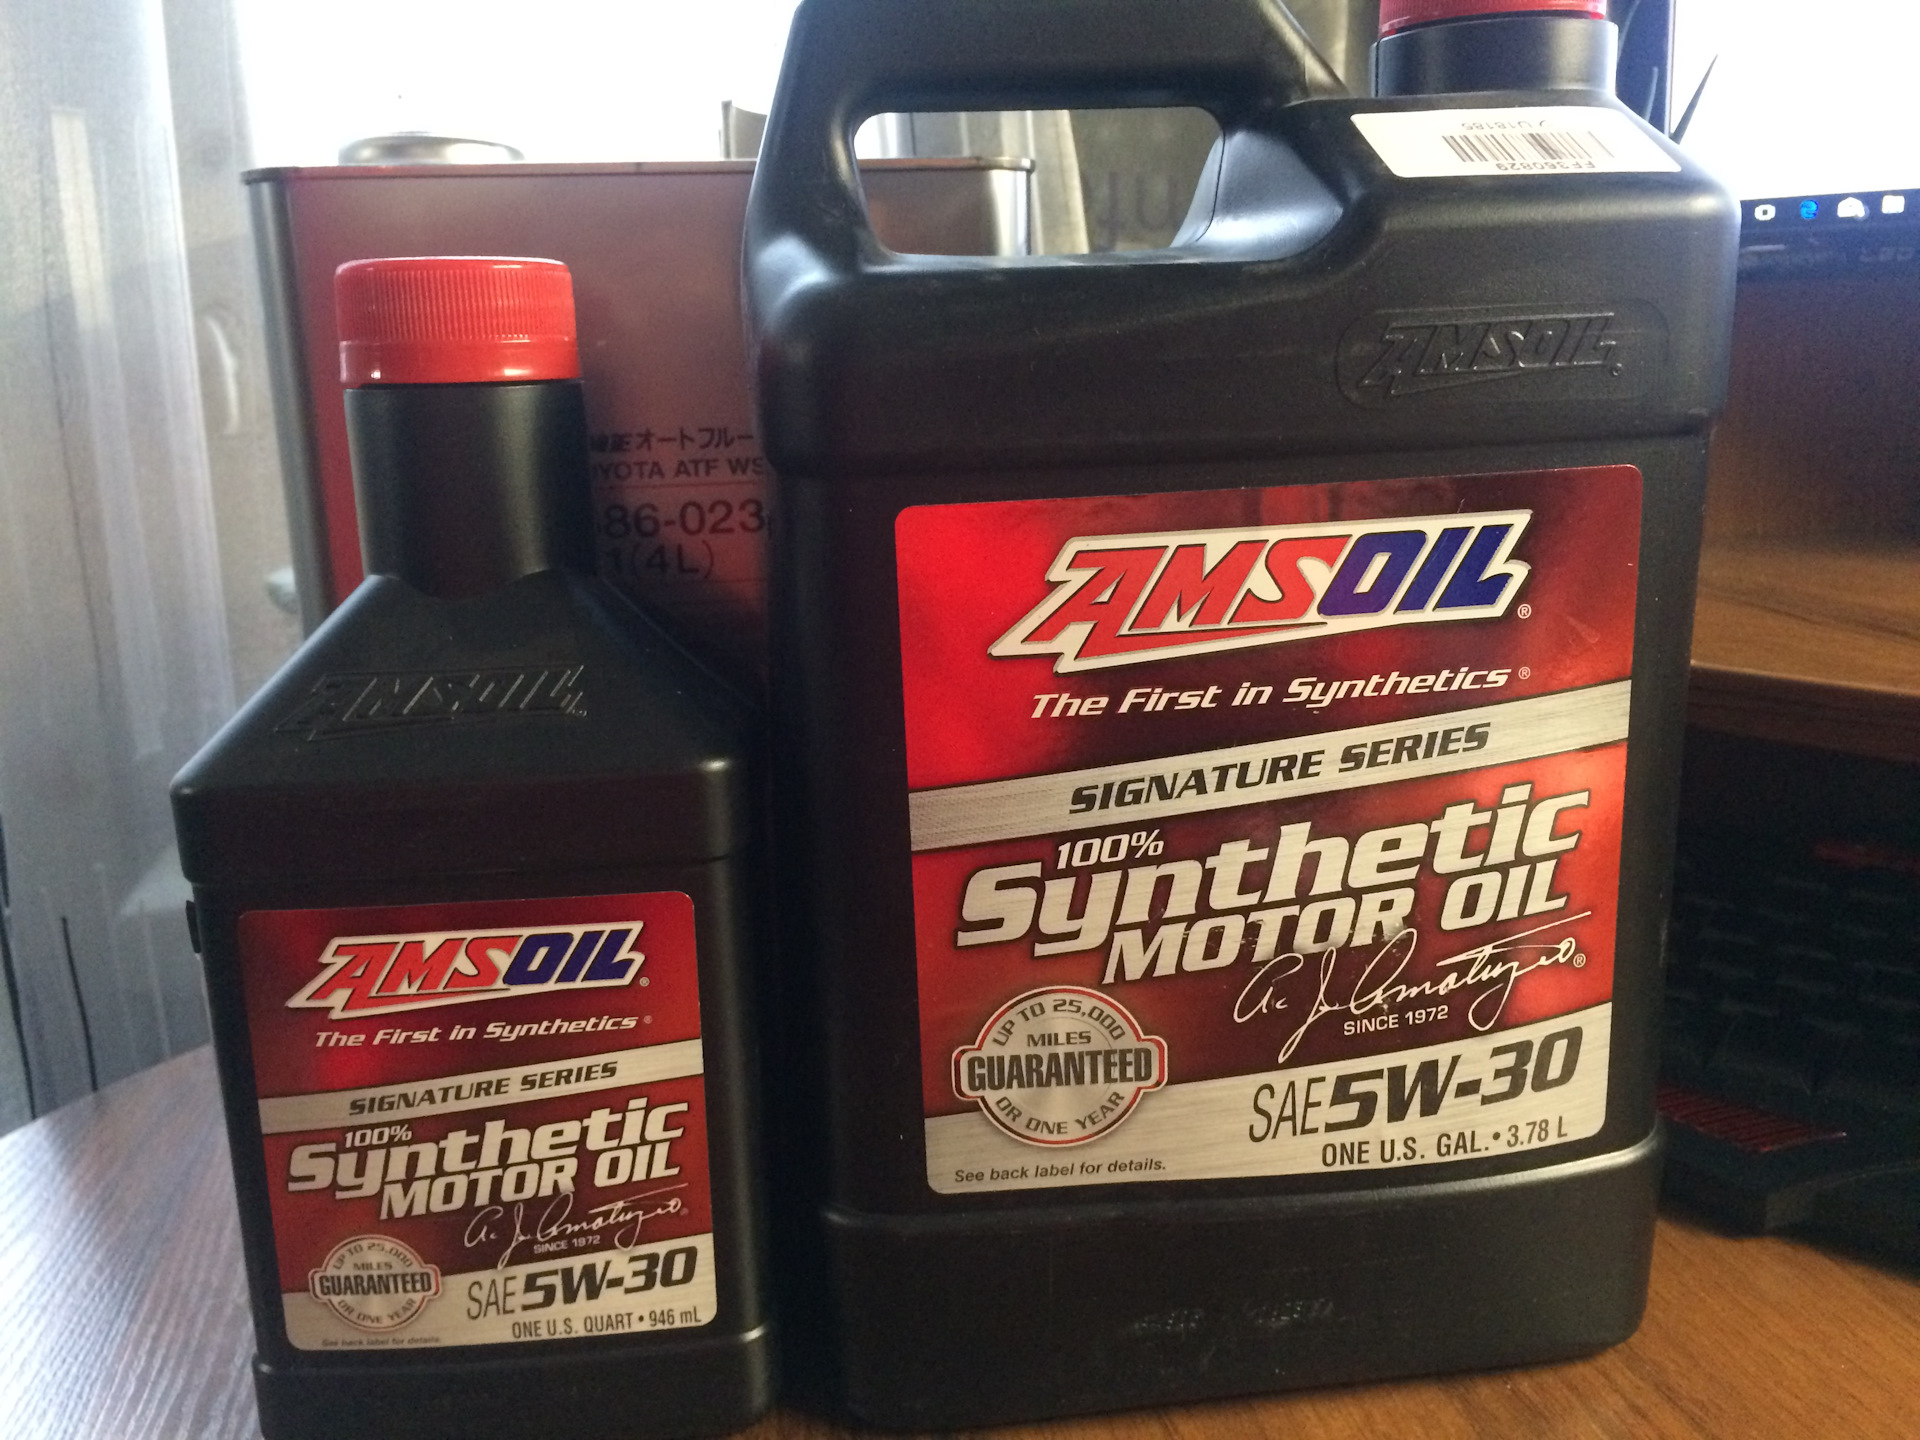 Signature series synthetic. AMSOIL Signature Series 5w-30. AMSOIL 5w30. AMSOIL Signature Series Synthetic Motor Oil 5w-30. AMSOIL Signature Series fuel-efficient ATF.